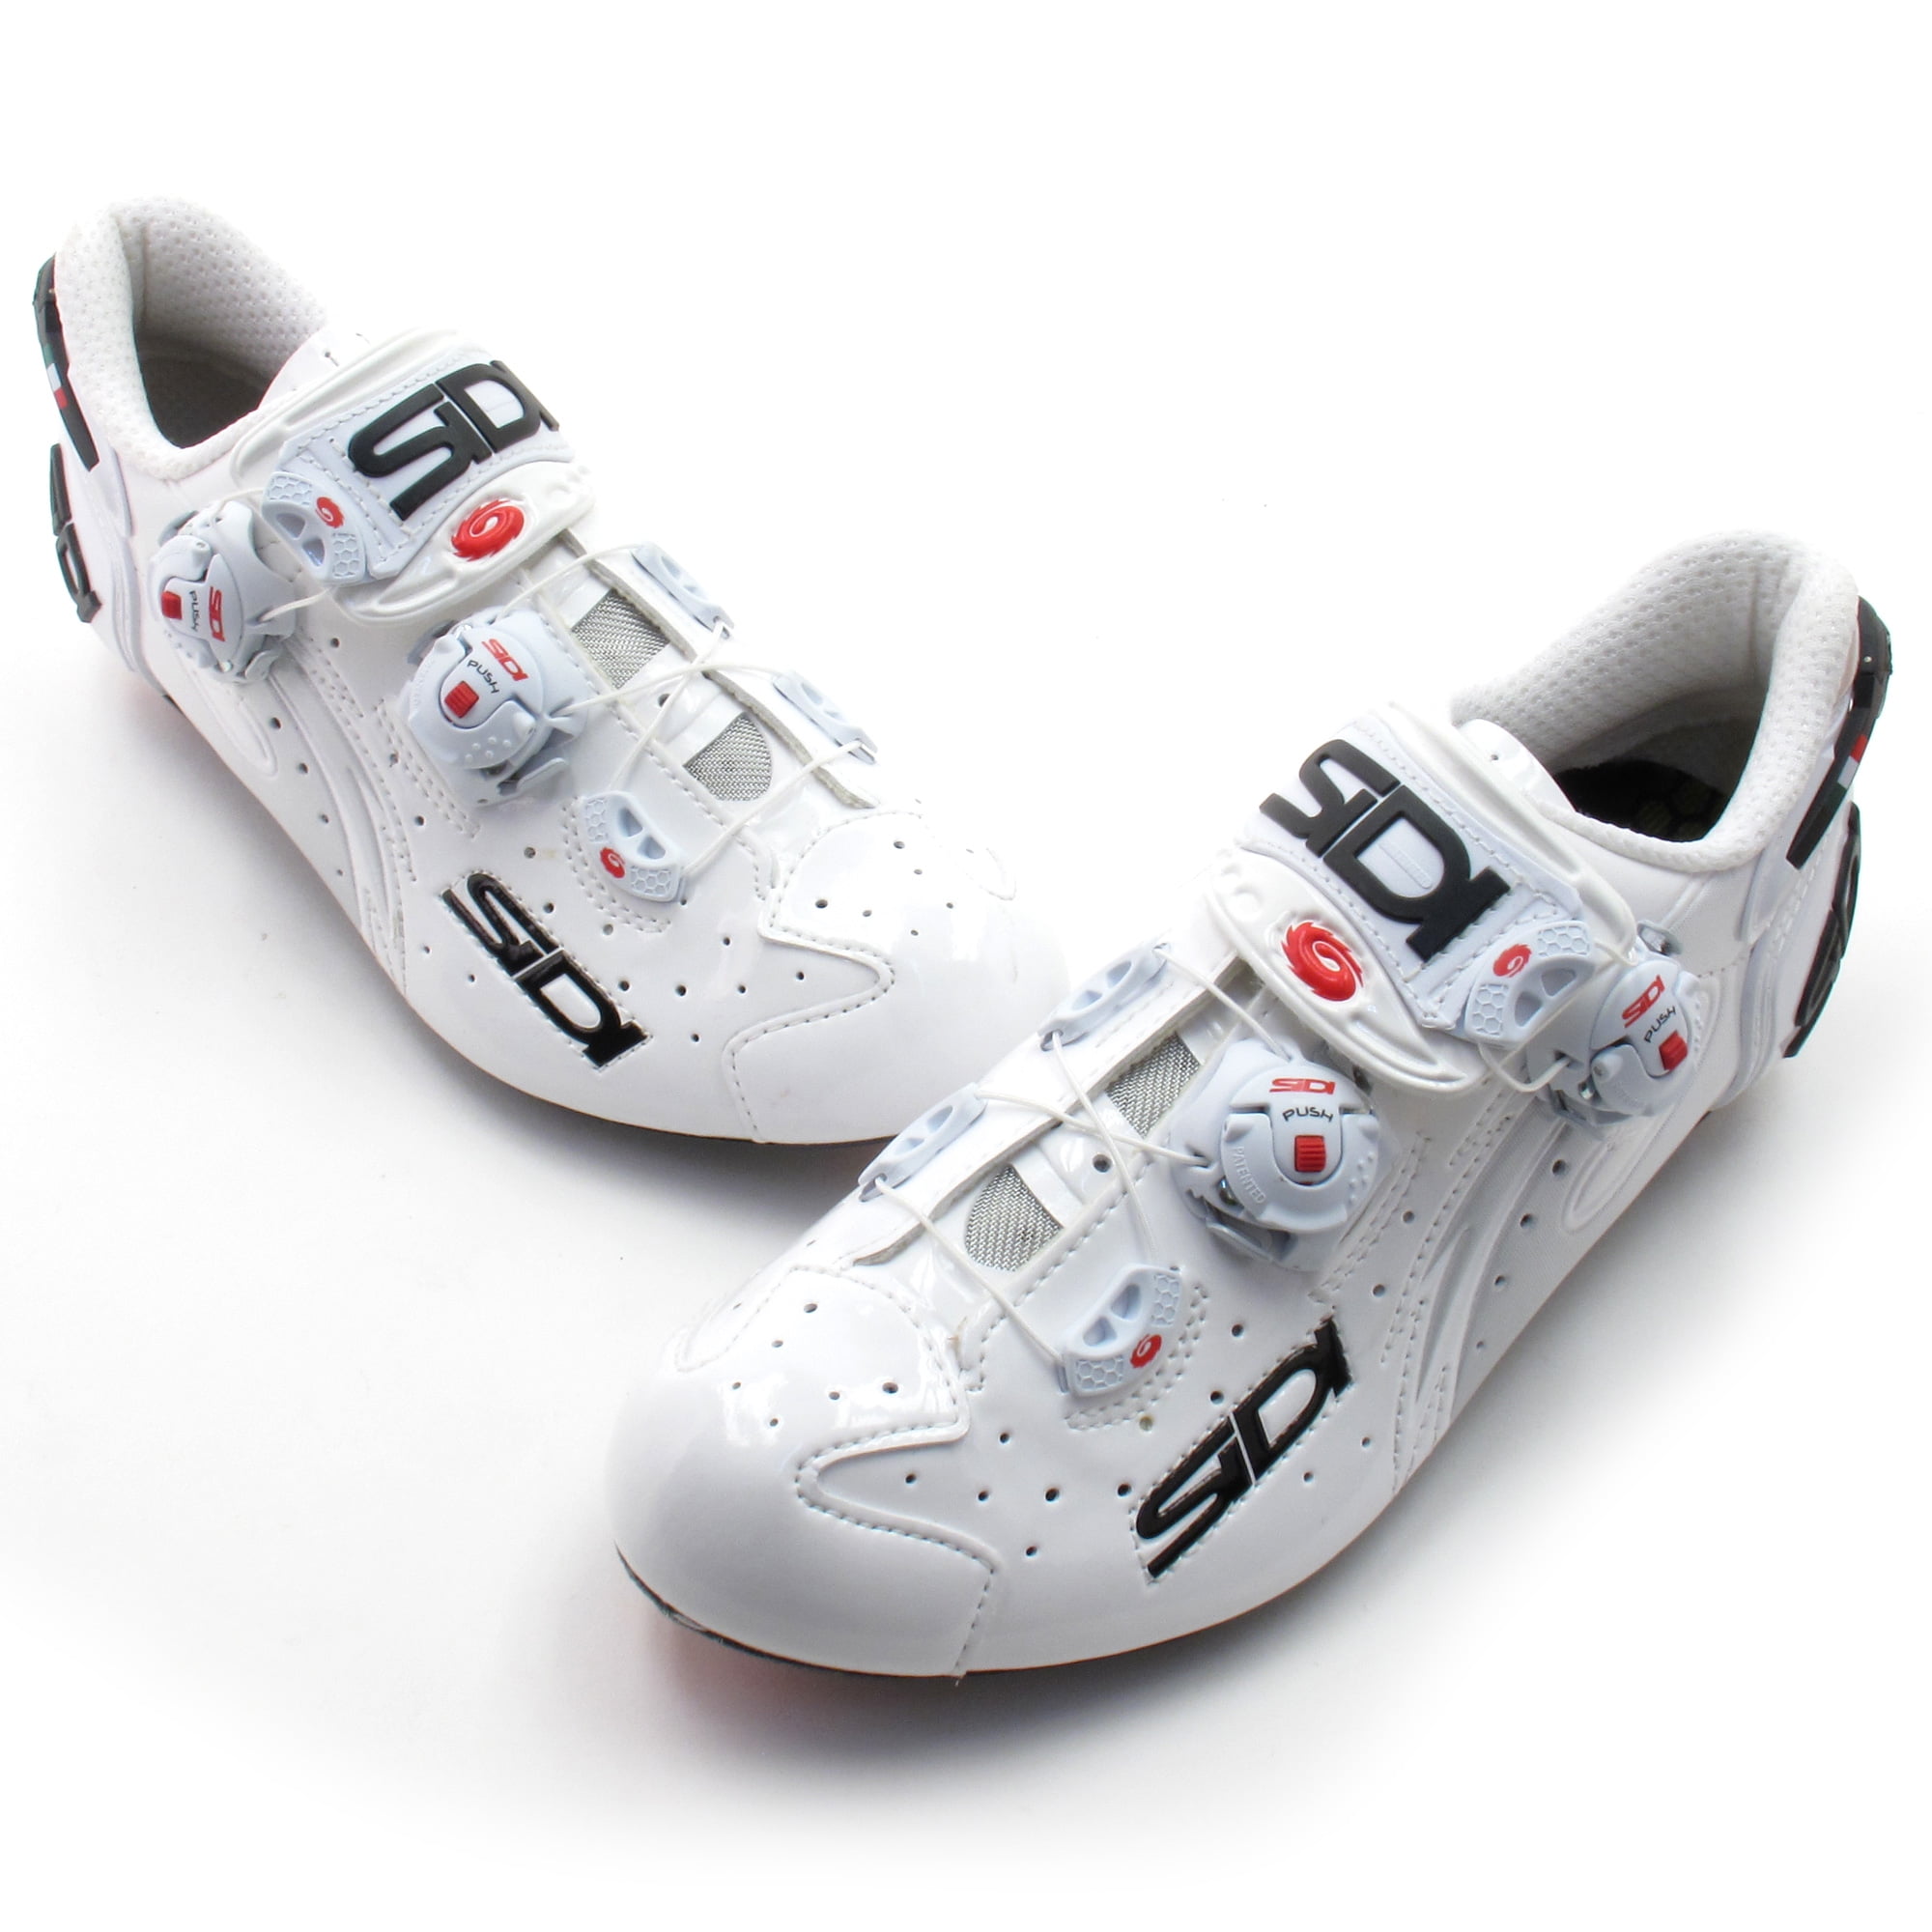 New SIDI WIRE Carbon Road Bike Cycling Shoes Blue Sky Black Red US Warehouse